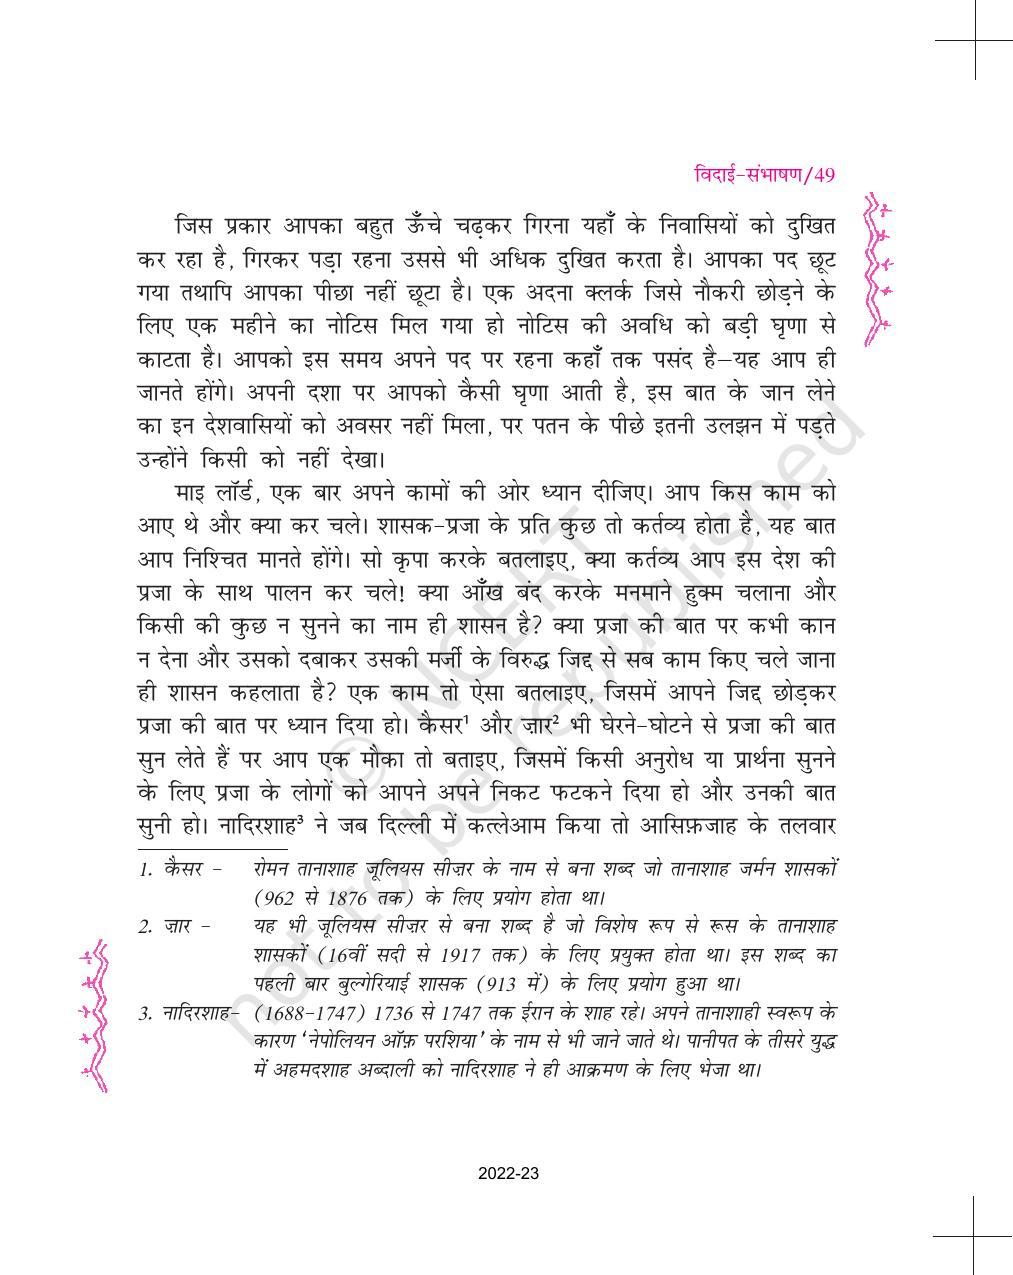 NCERT Book for Class 11 Hindi Aroh Chapter 4 विदाई – संभाषण - Page 6